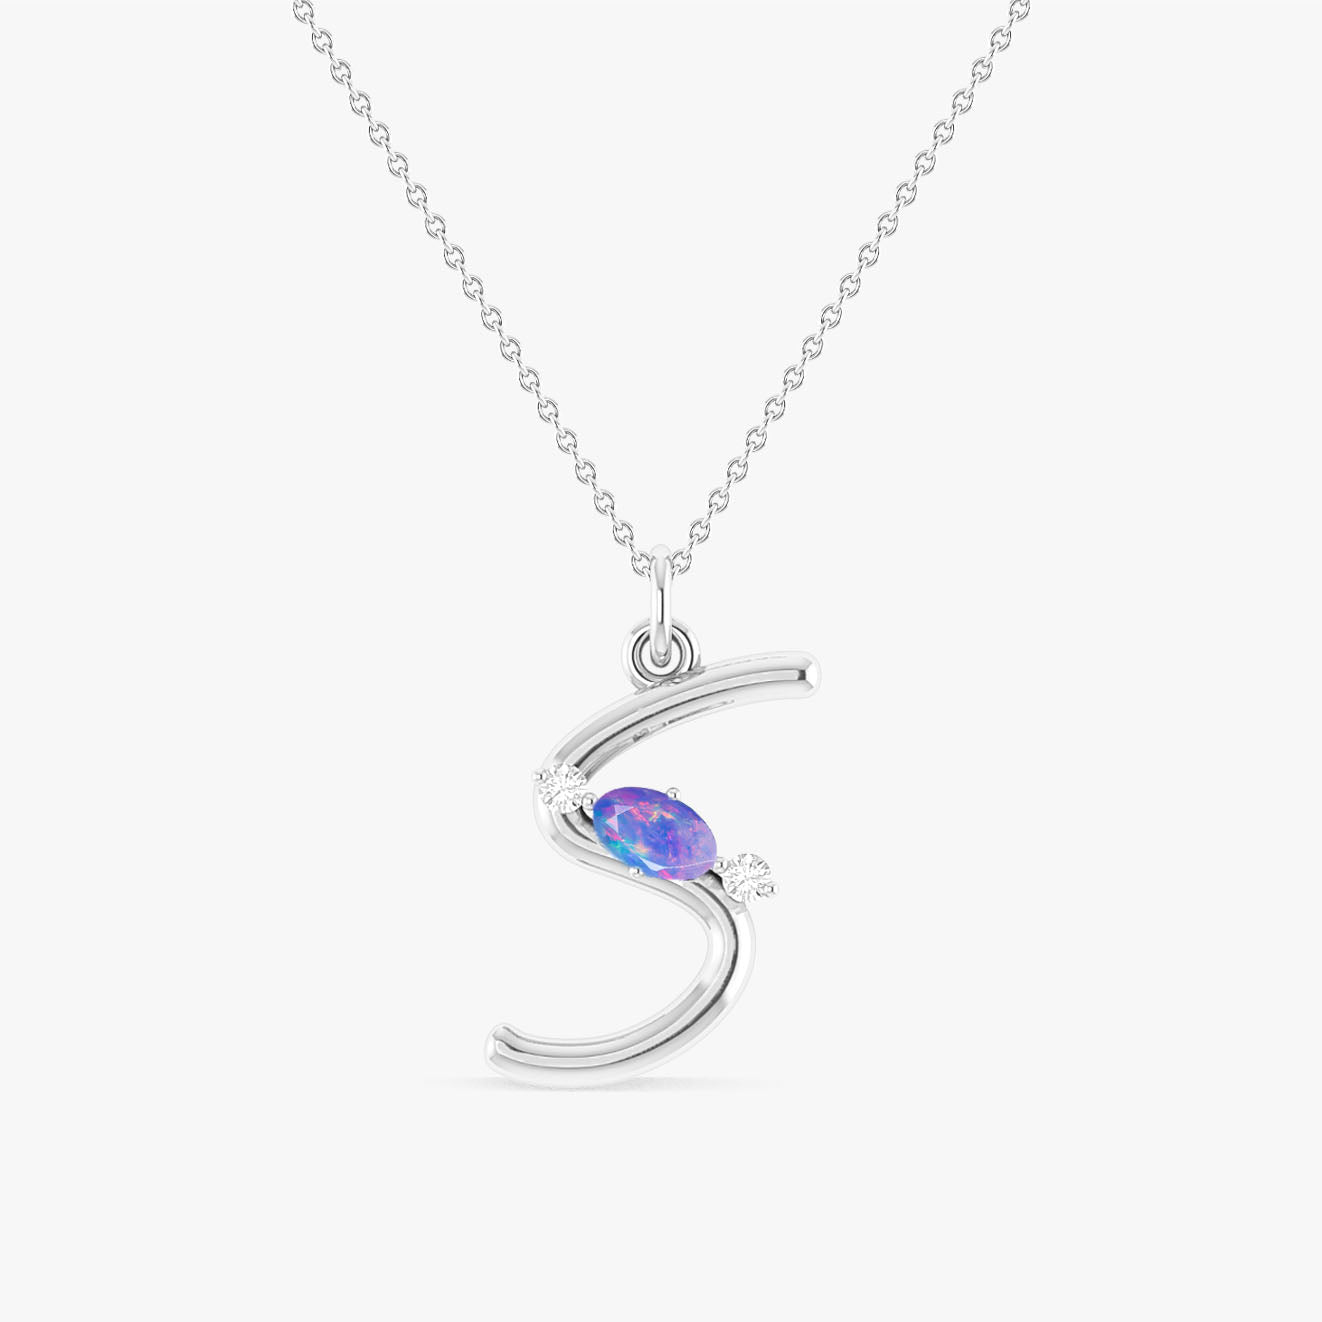 Lavender Opal Gemstone Capital "S" Initial Necklace